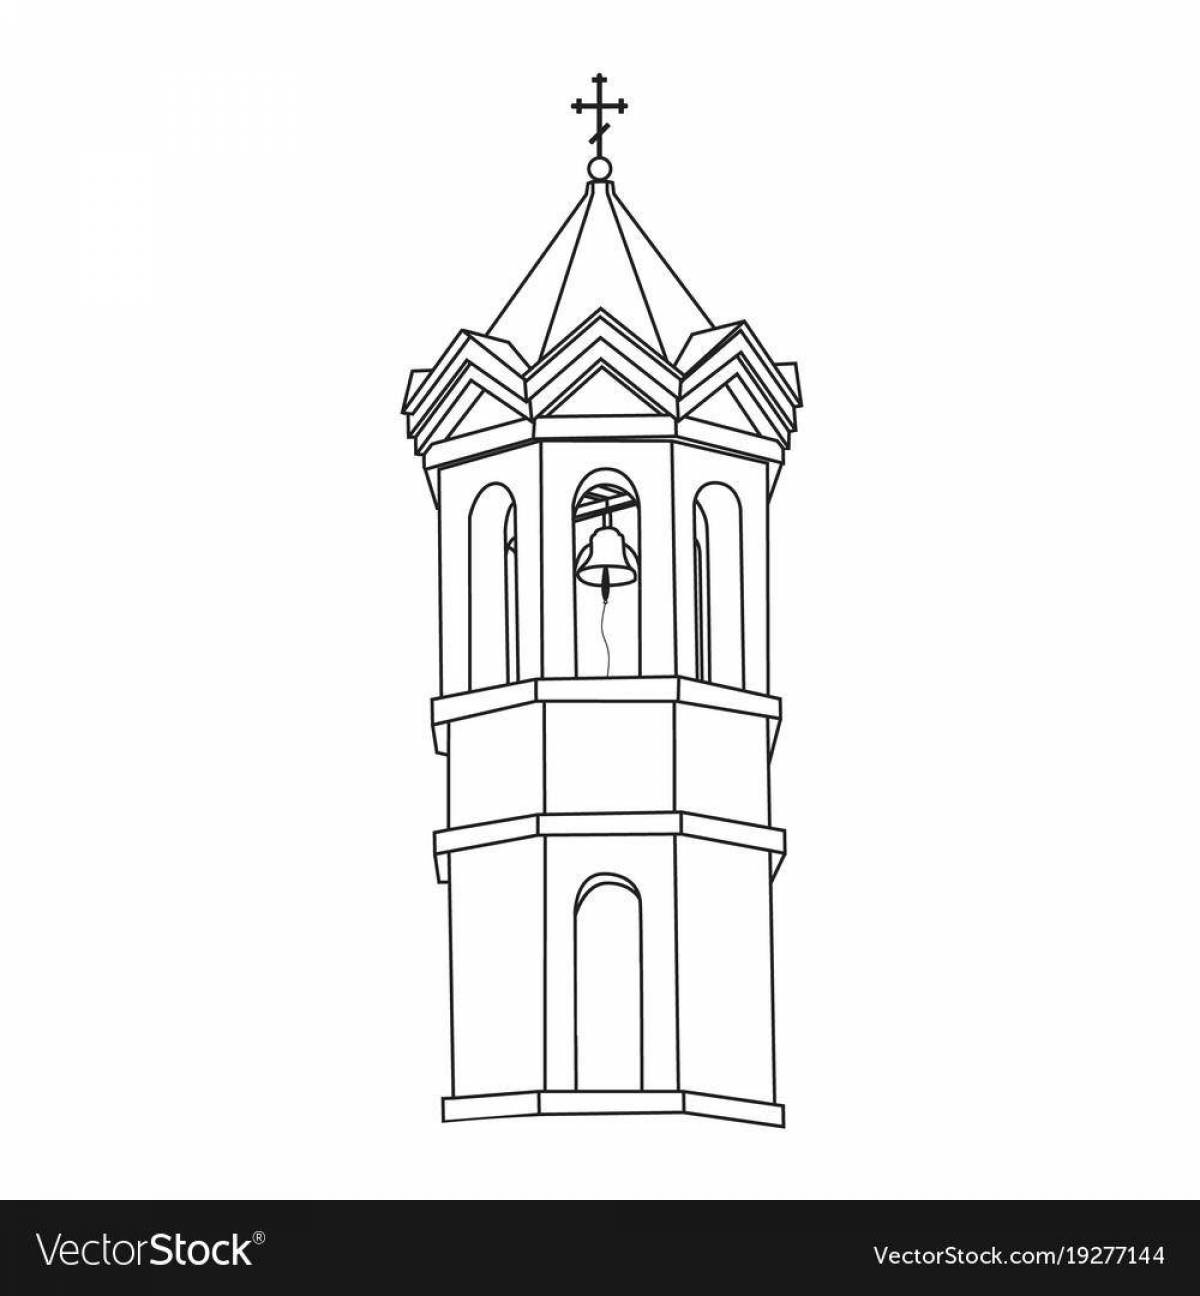 Awesome chapel coloring page